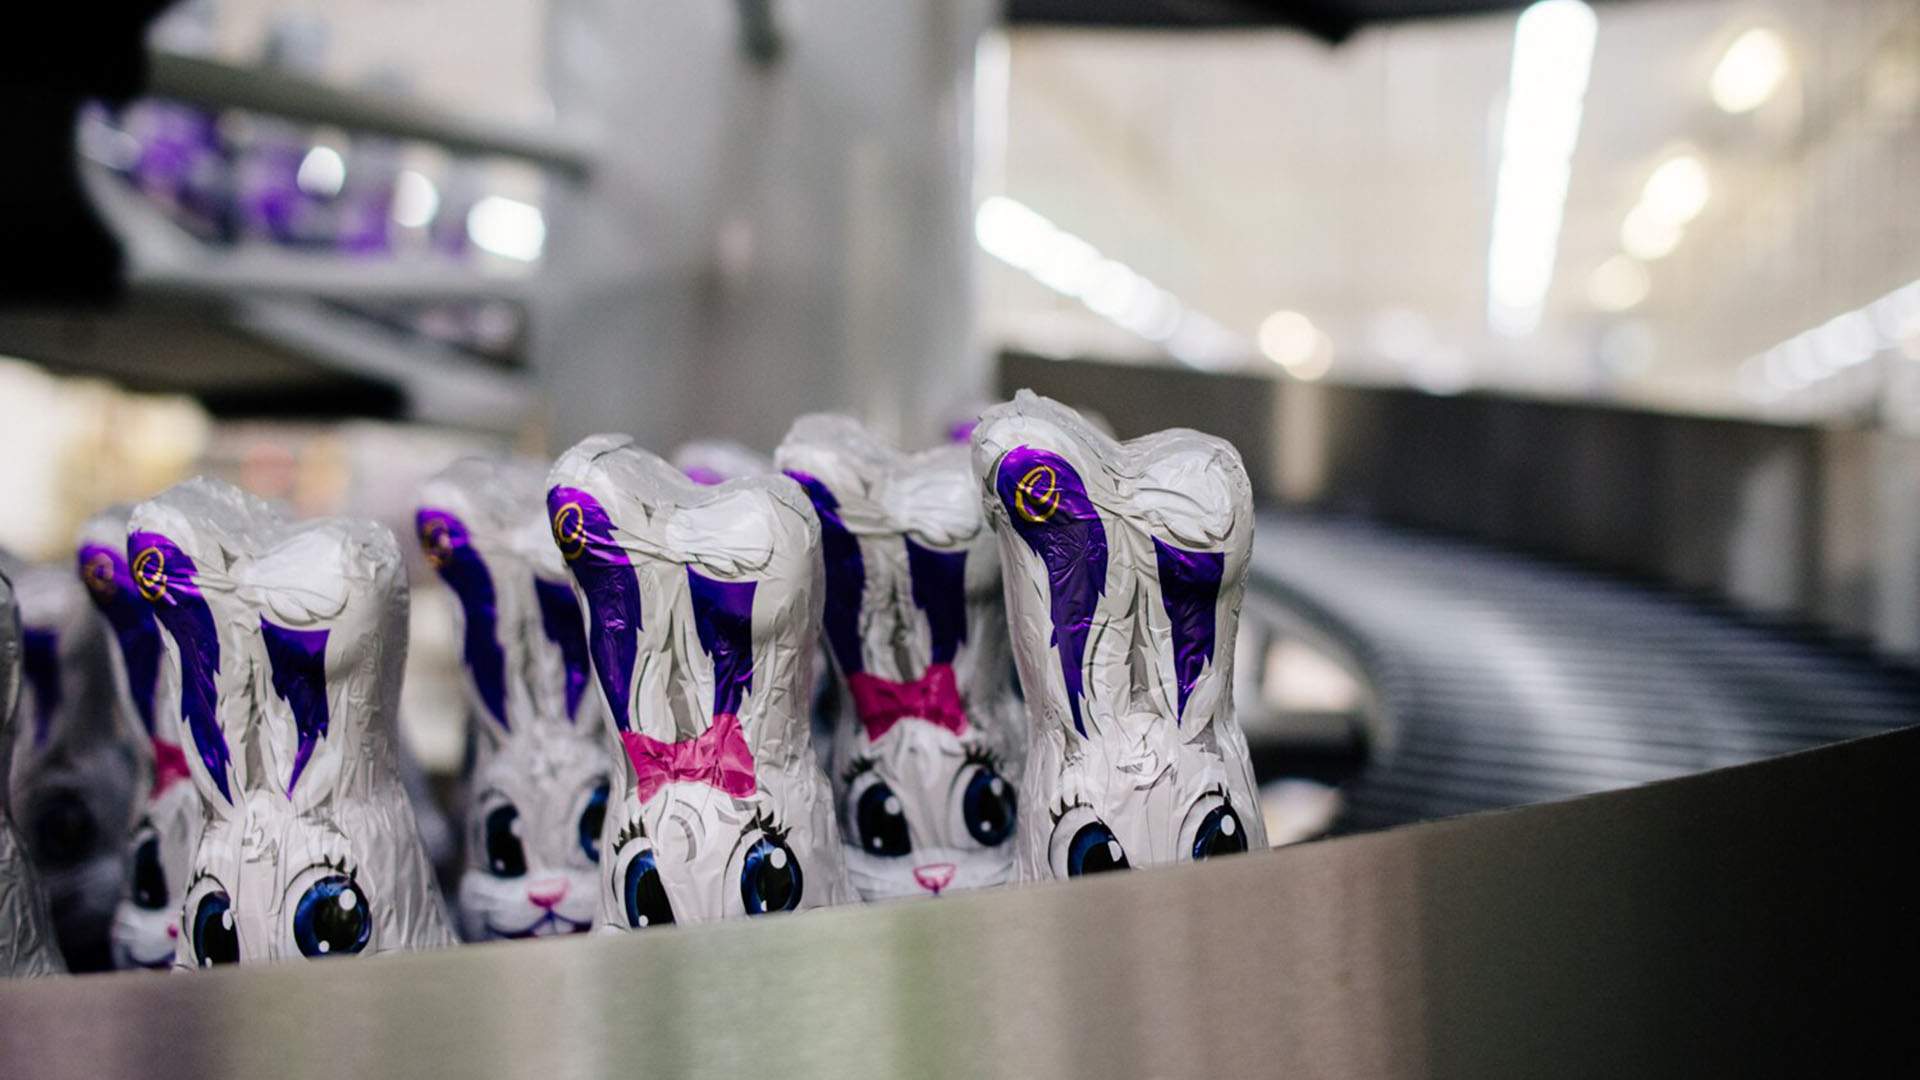 SBS's New Three-Hour Tour of a Cadbury Chocolate Factory Is the Content We Need Right Now